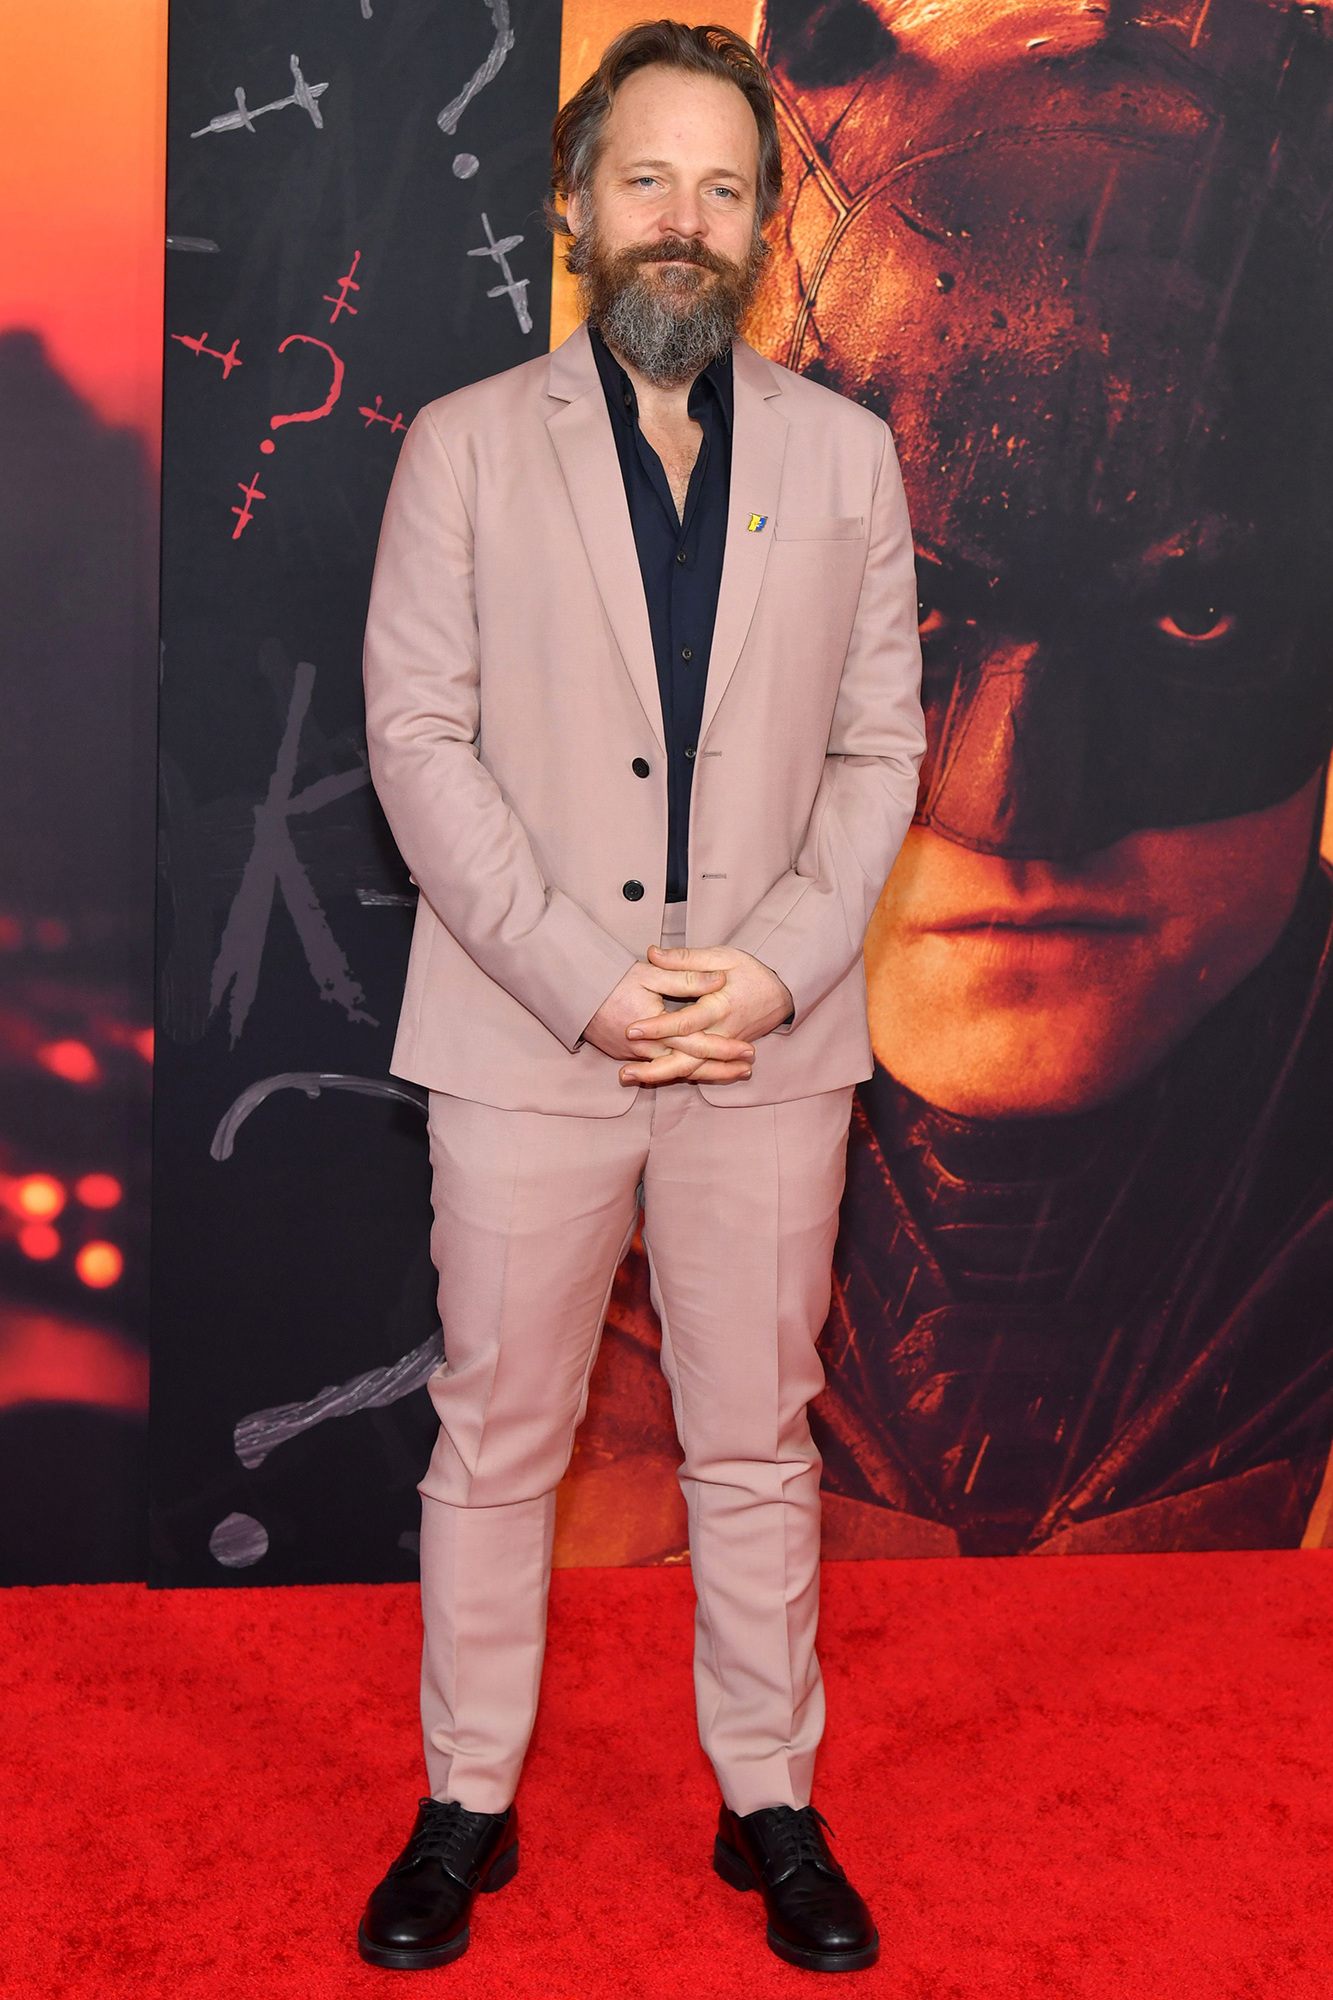 Zoe Kravitz’ Dress at ‘The Batman’ Premiere Was an Ode to Her DC Comics’ Character